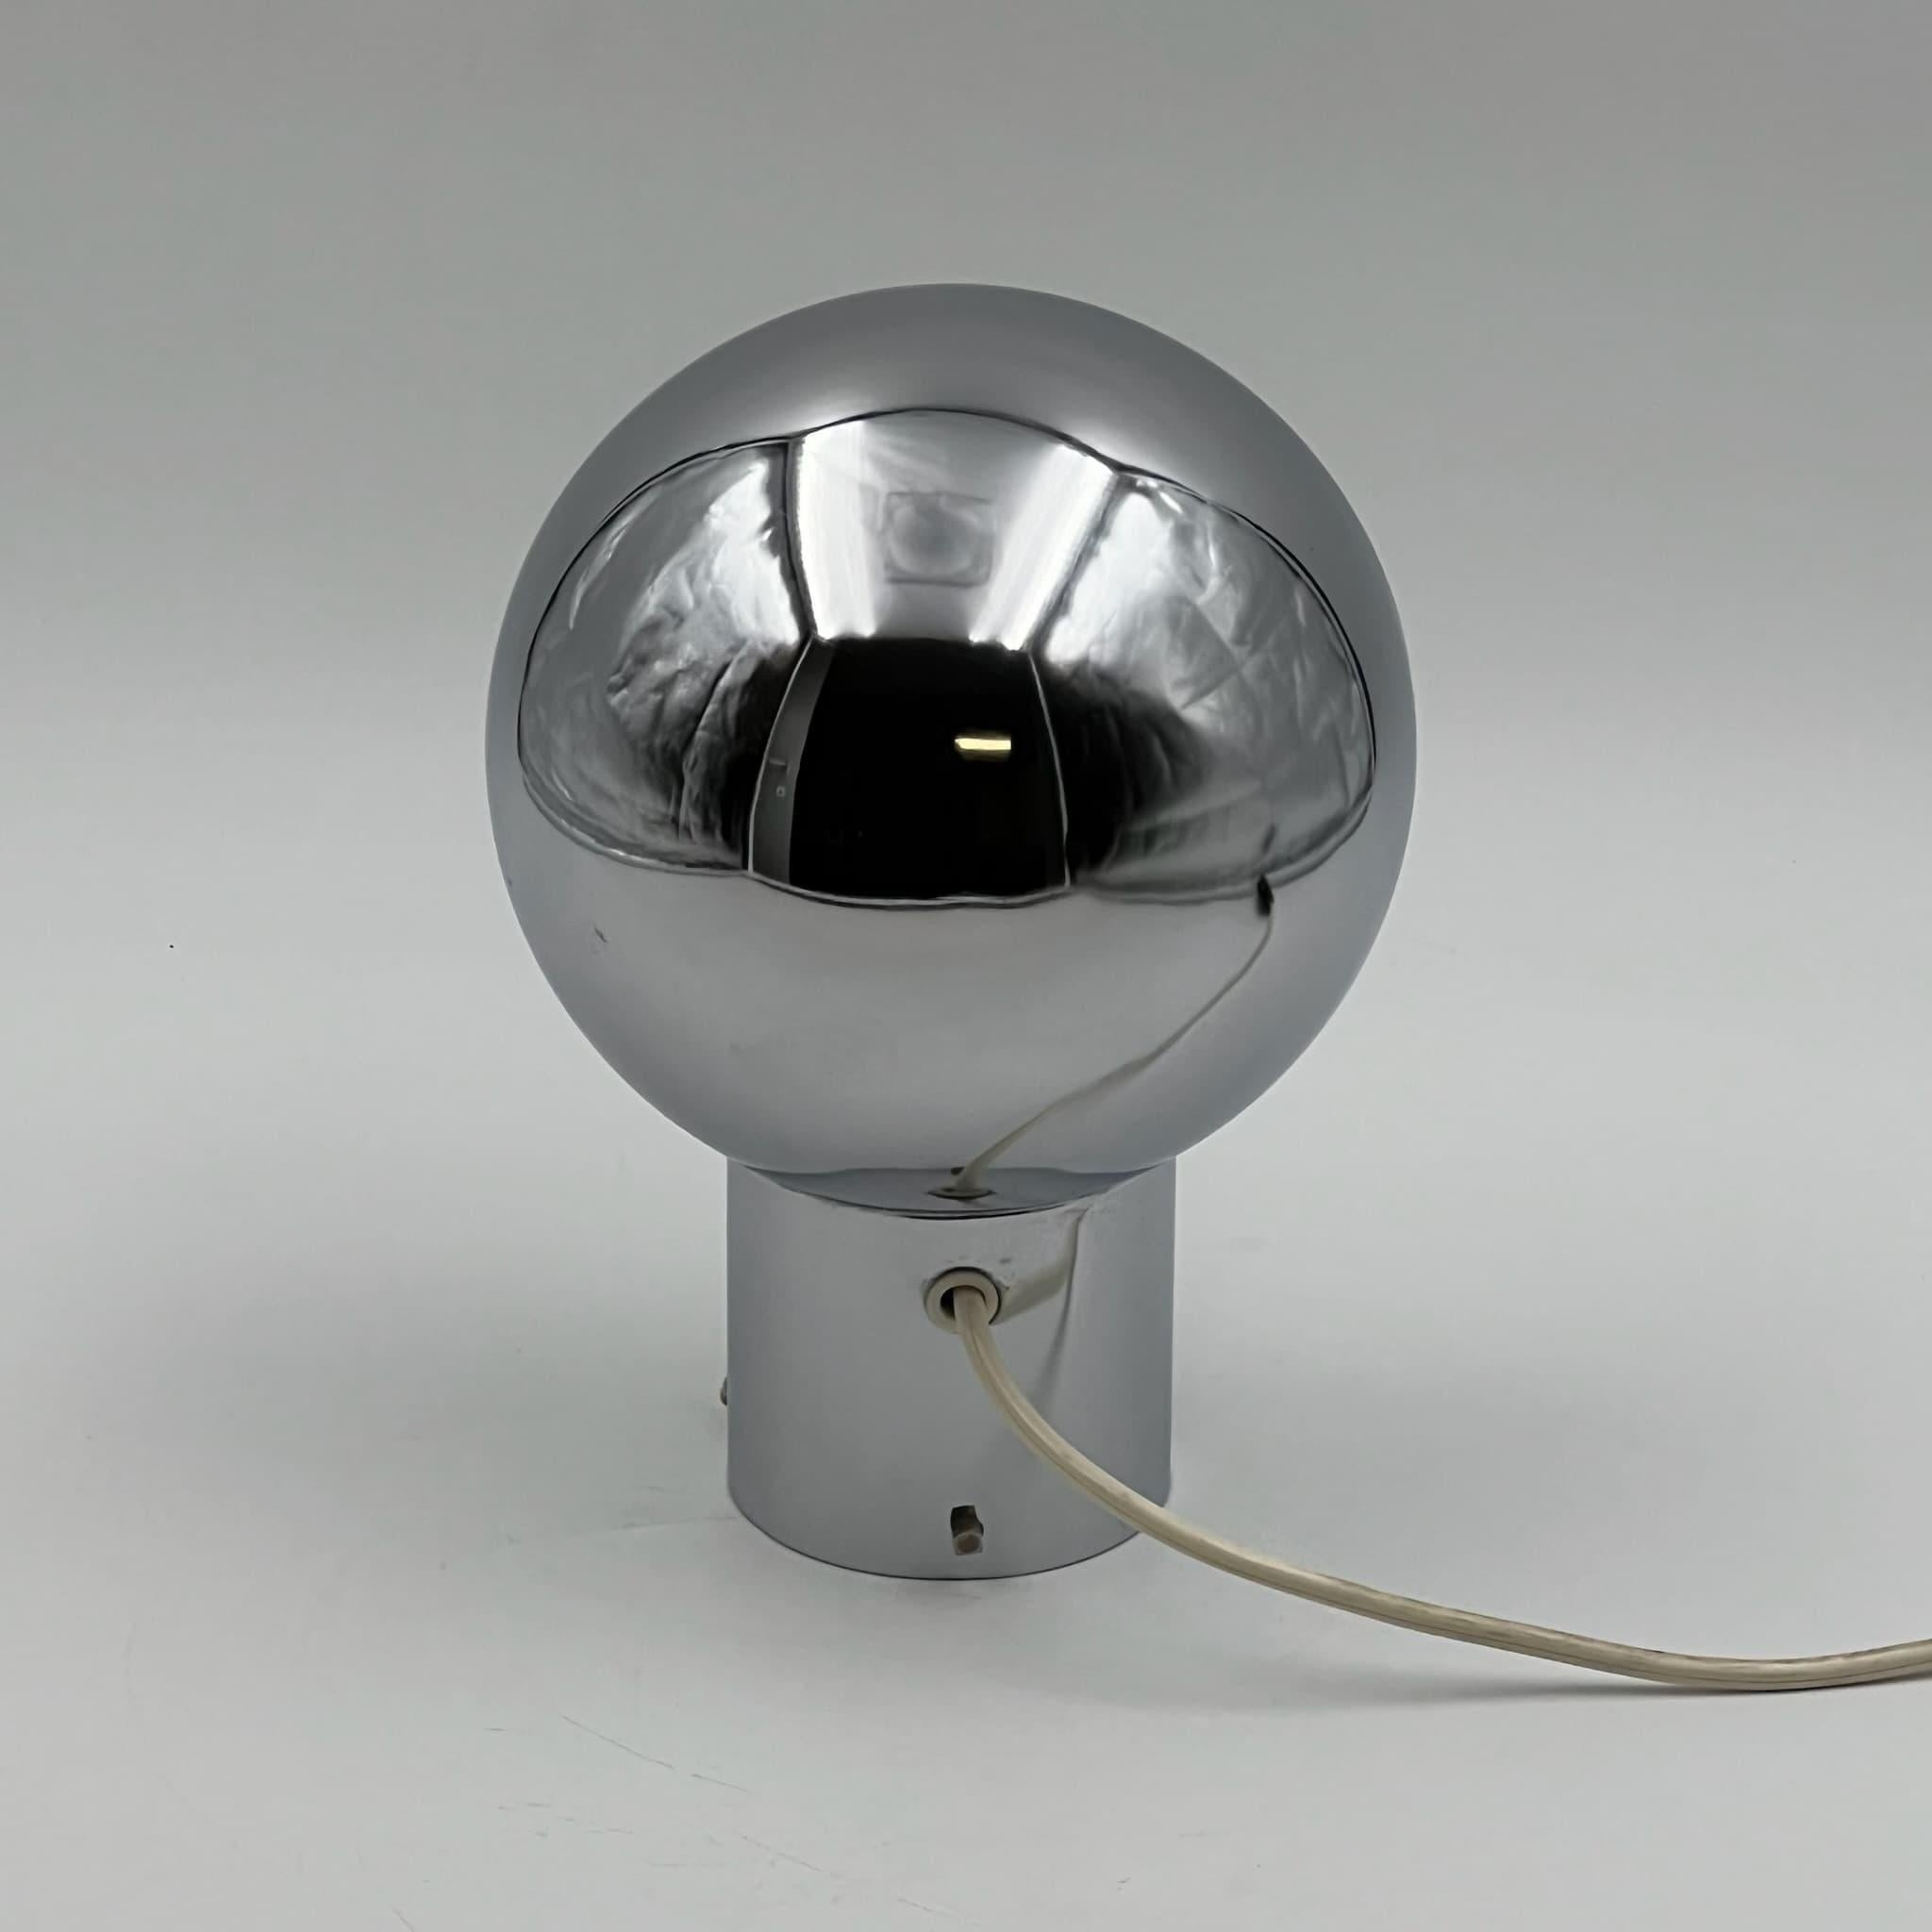 Italian 60s Iconic Eyeball Lamp - Space Age Table Lamp Reggiani Eclipse Style For Sale 2